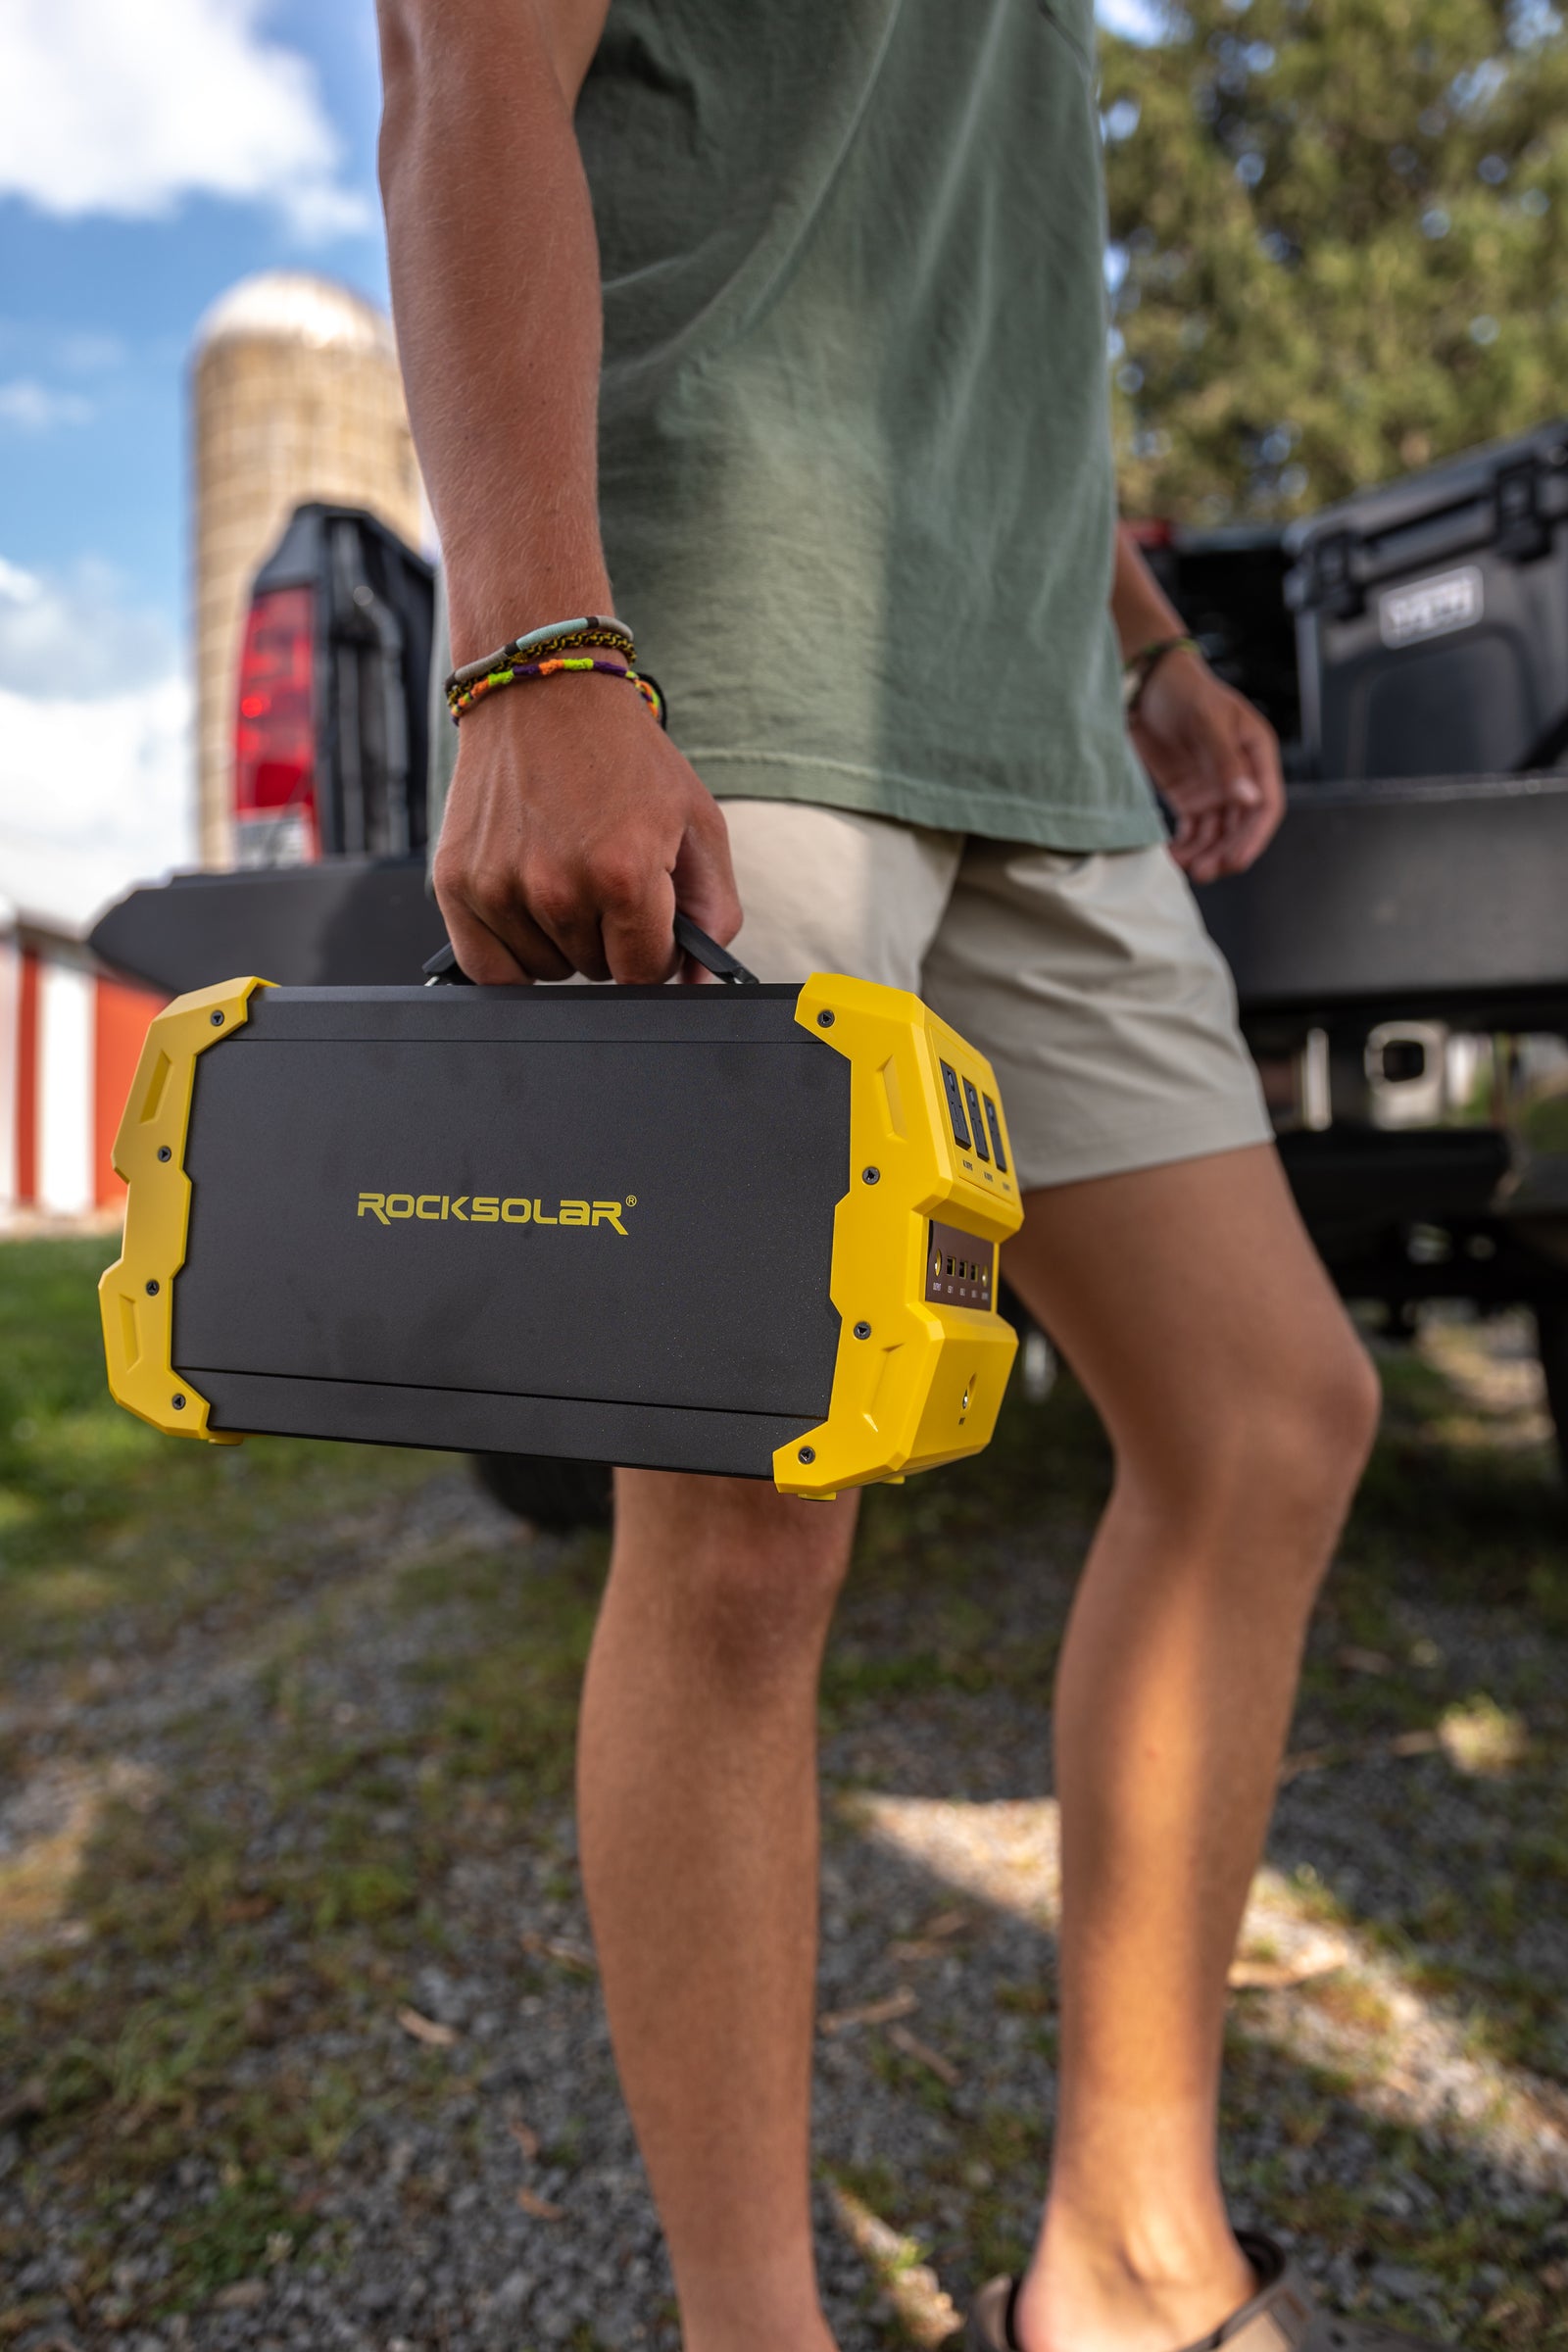 Power Up Your Road Trip with Rocksolar's Top-Rated Portable Solar Generators